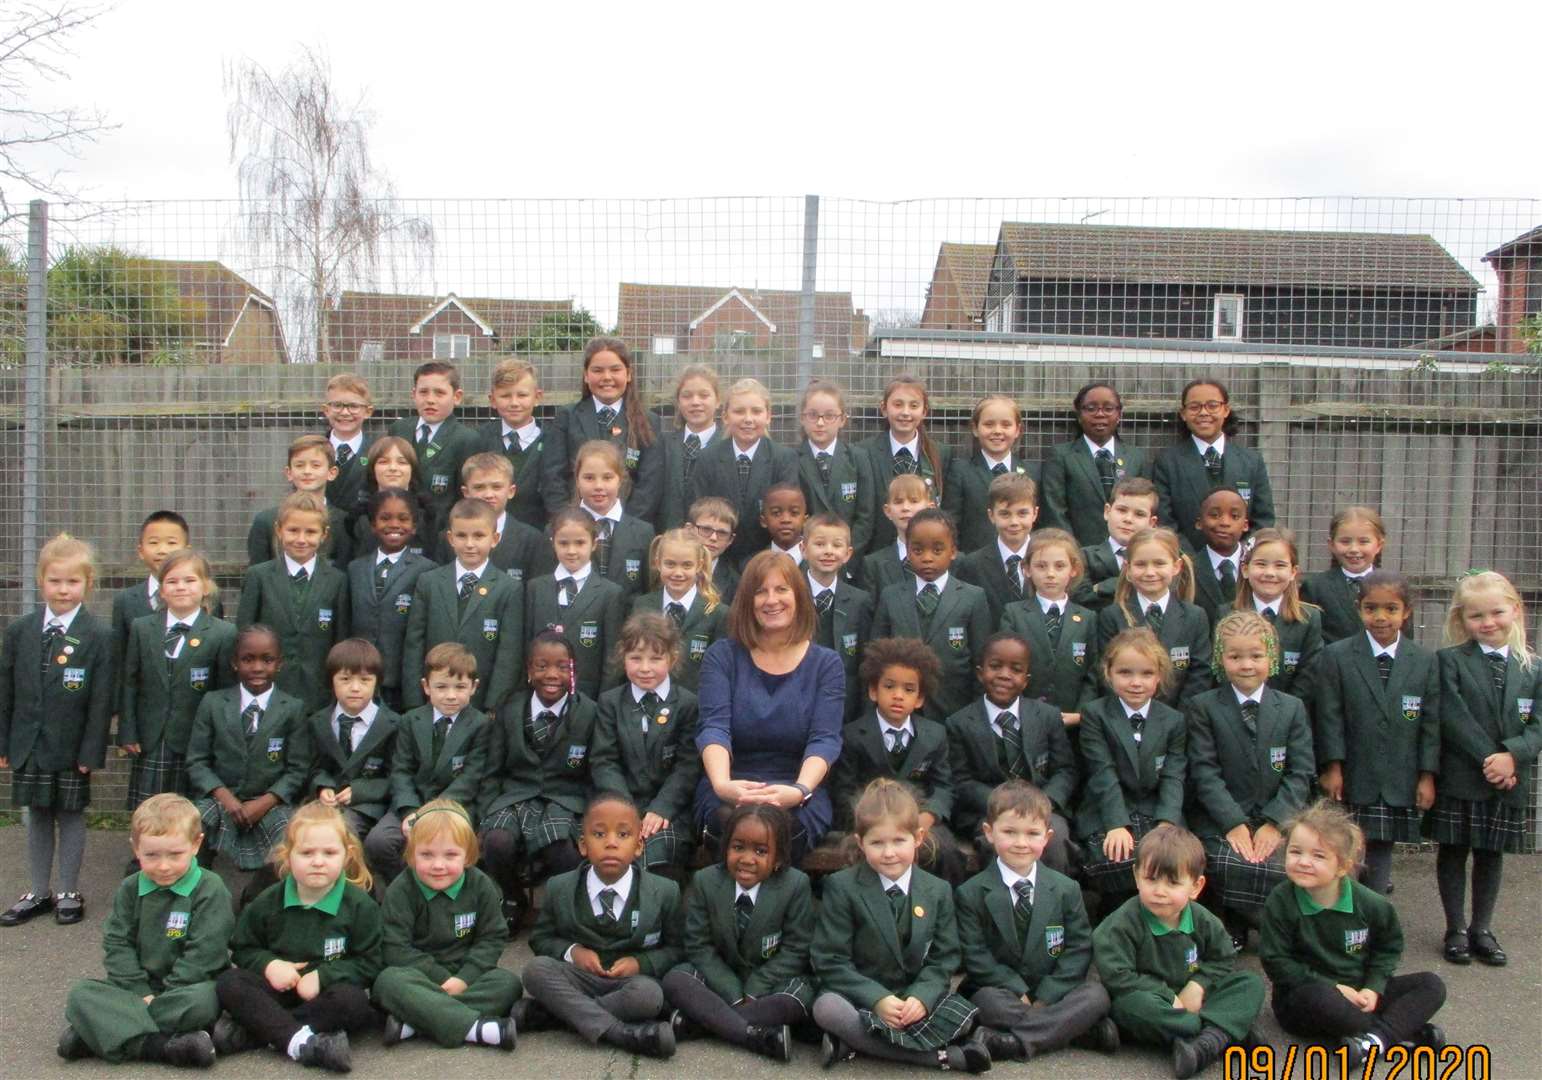 Good in all areas: Pupils at Elliott Park Private School on the Isle of Sheppey after their Ofsted inspection